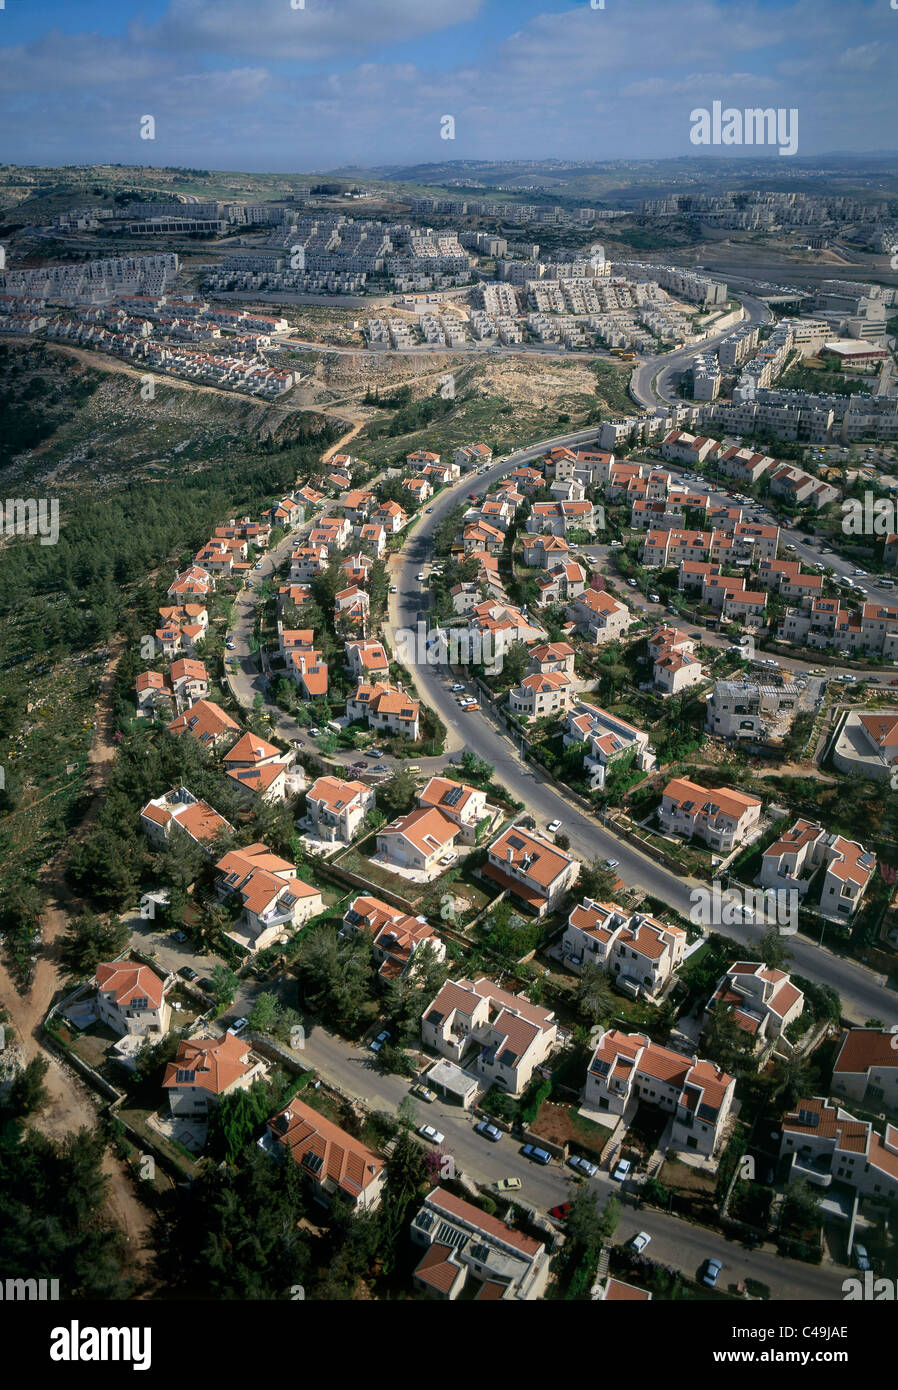 Aerial photograph of the Build Yopur Own Home section in Ramot Stock Photo